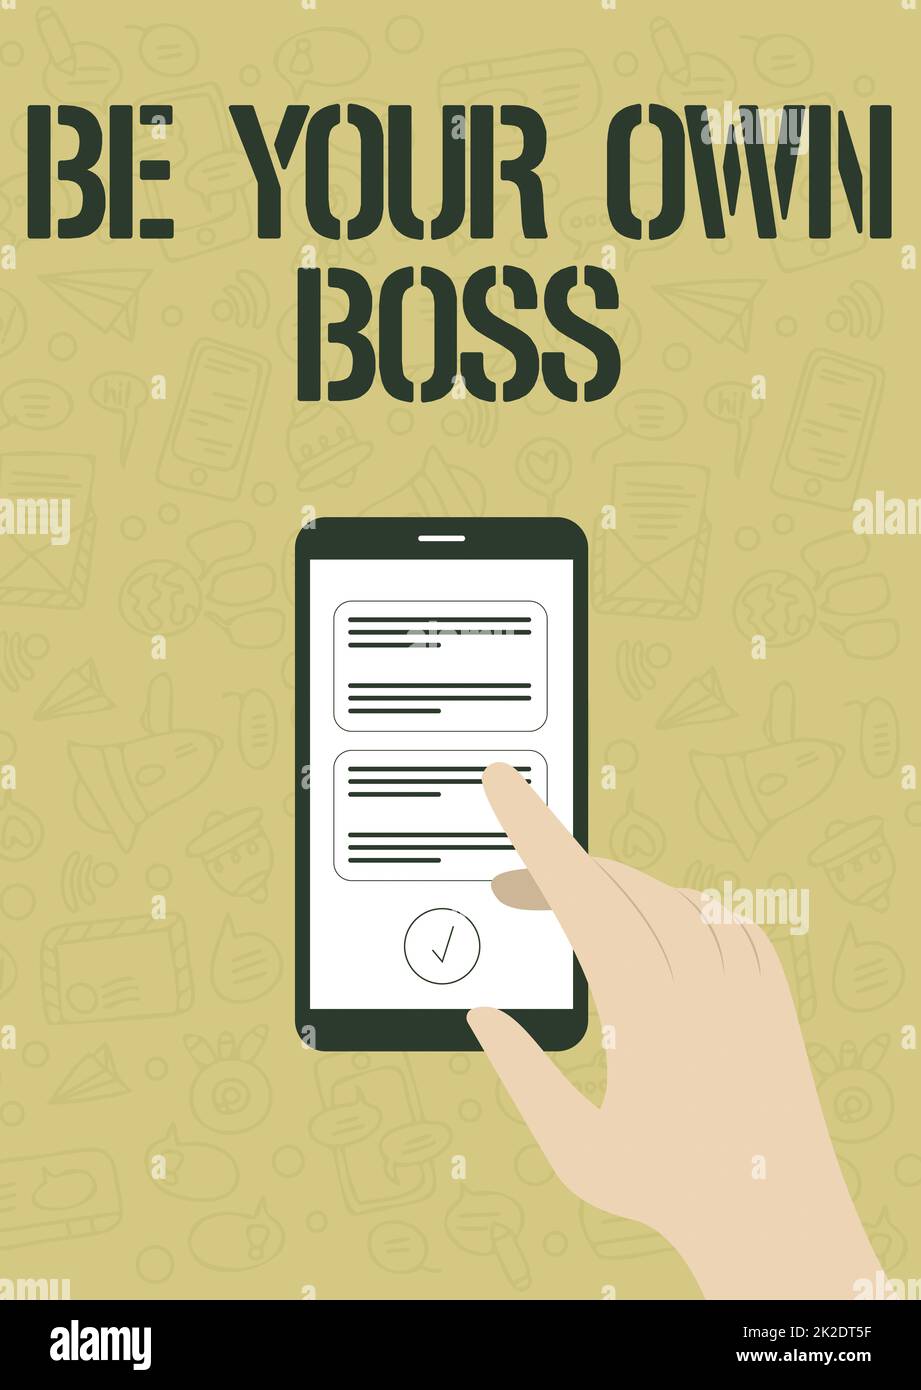 Conceptual caption Be Your Own Boss. Business concept Entrepreneurship Start business Independence Selfemployed Illustration Of Hand Using Smart Phone Texting New Important Messages. Stock Photo